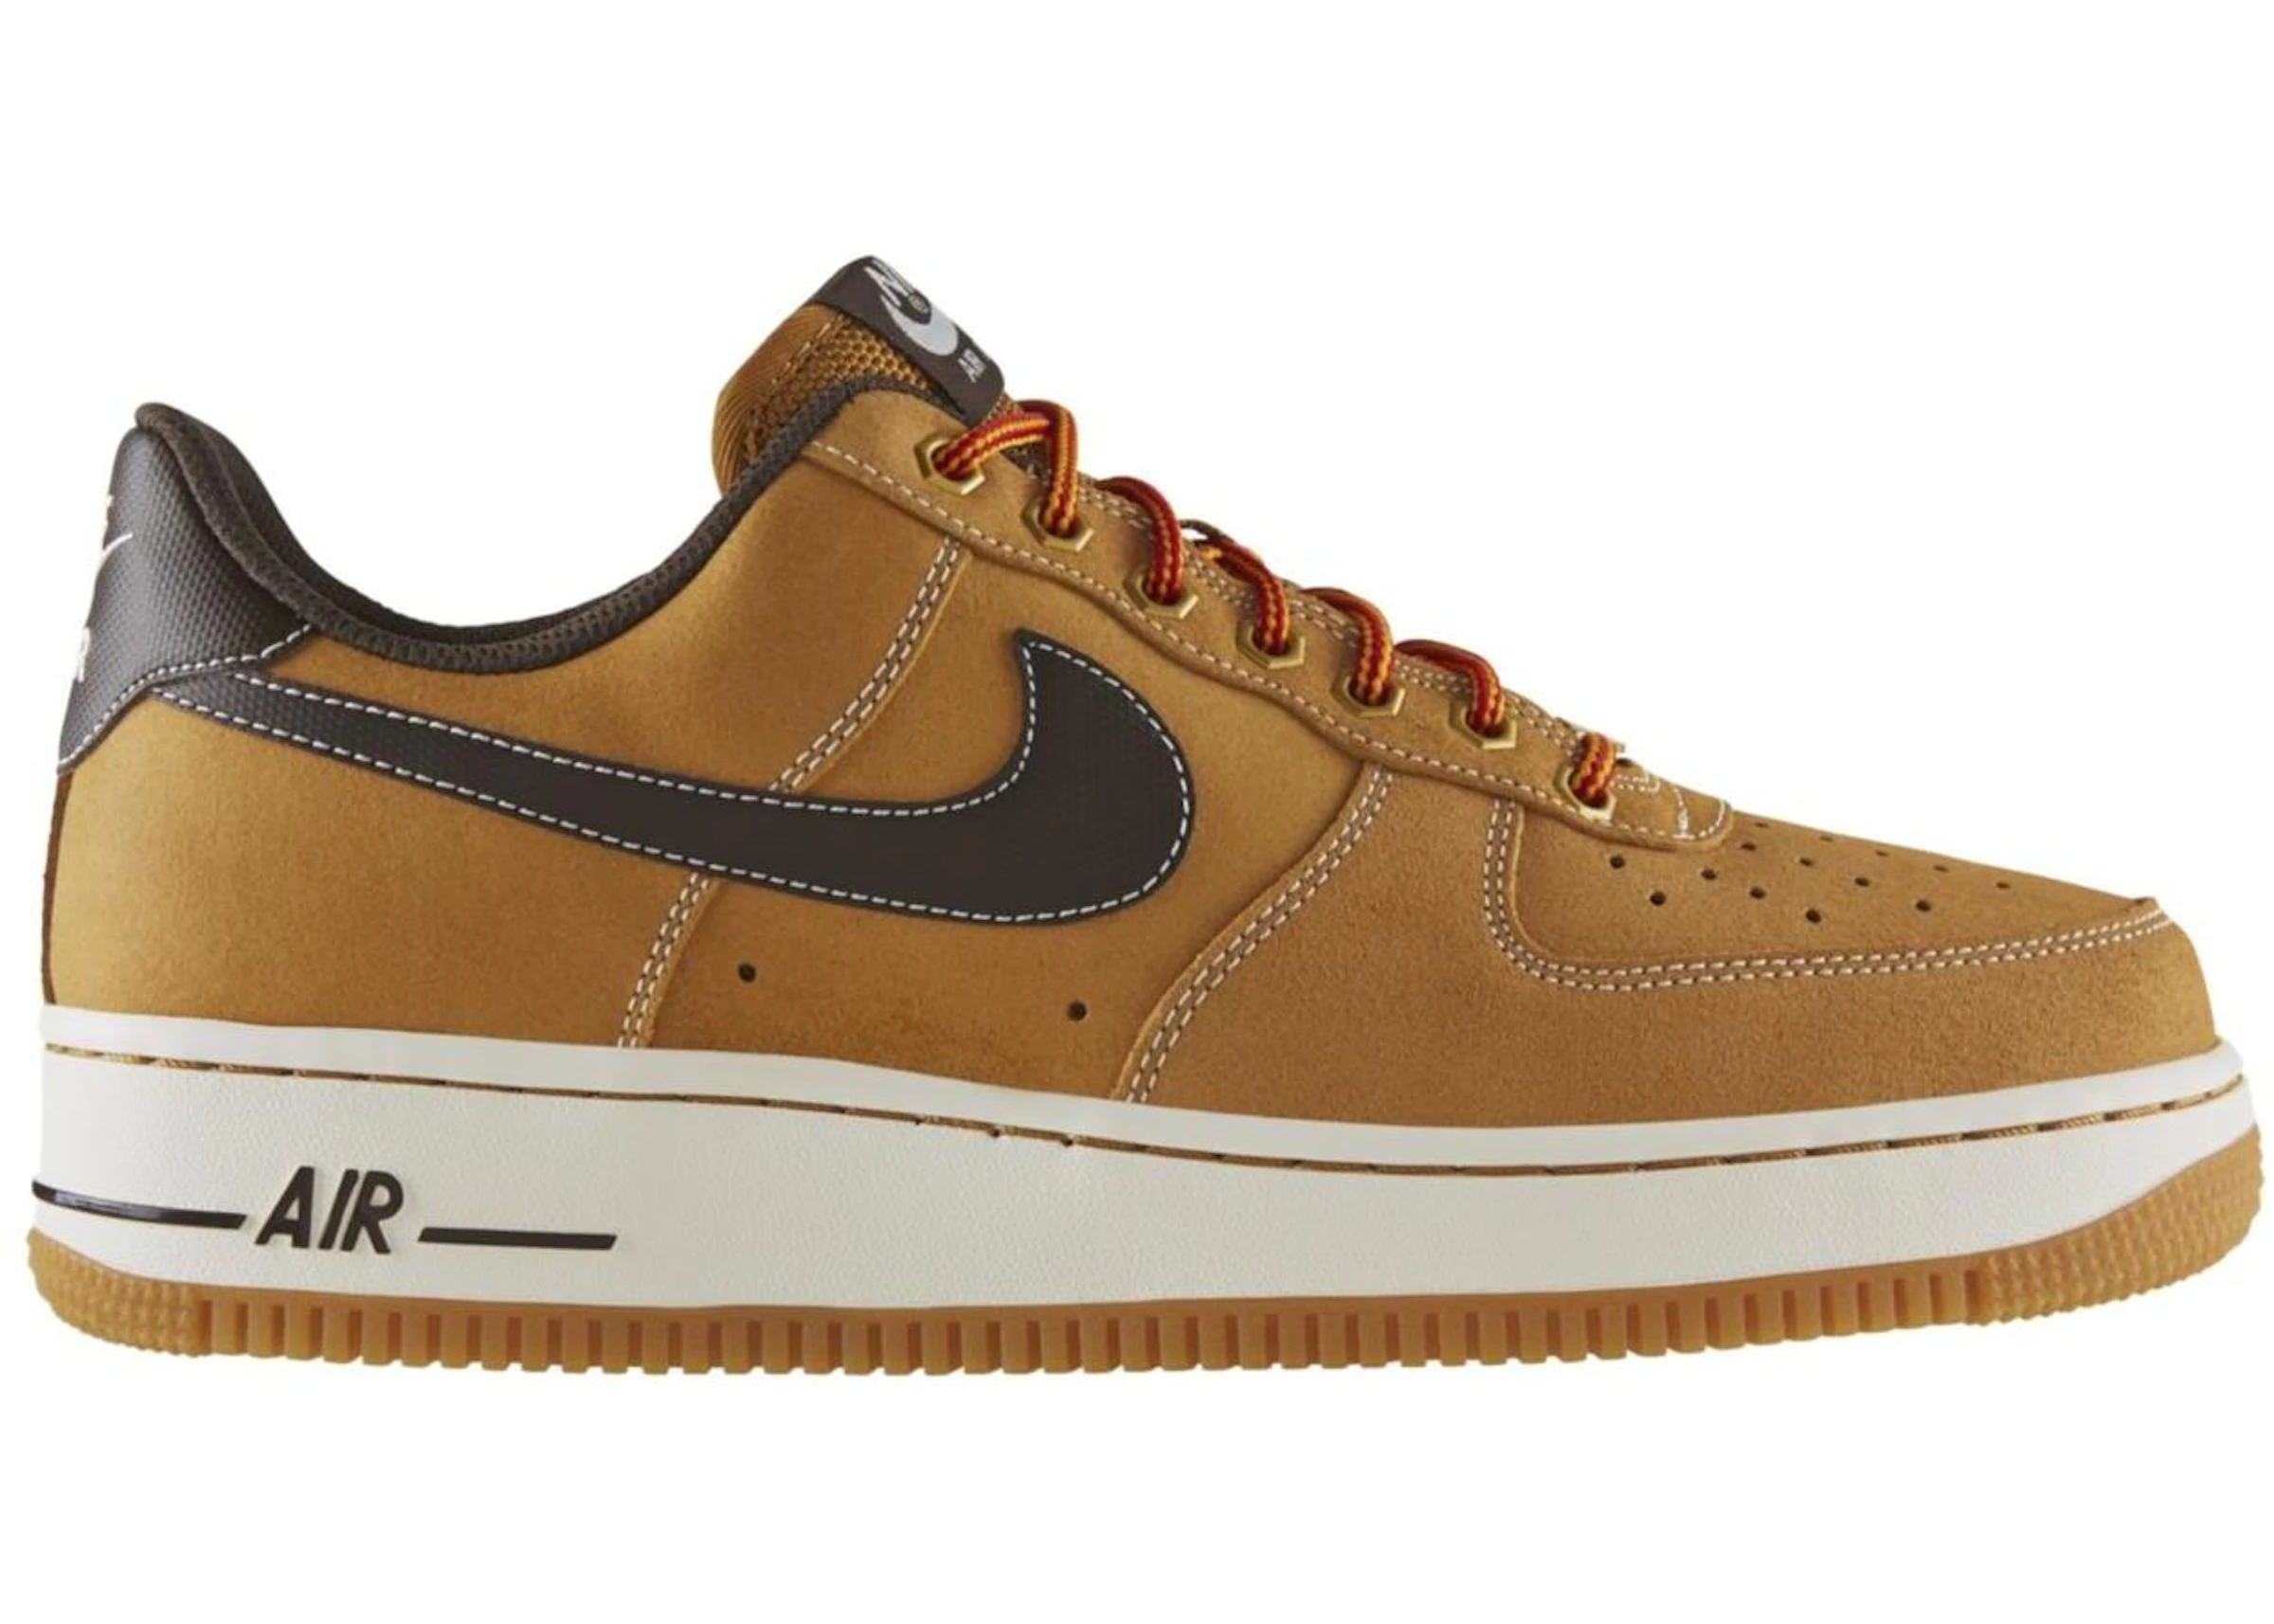 wage Colleague Custodian Nike Air Force 1 Low Winter Wheat Brown - 488298-704 - US